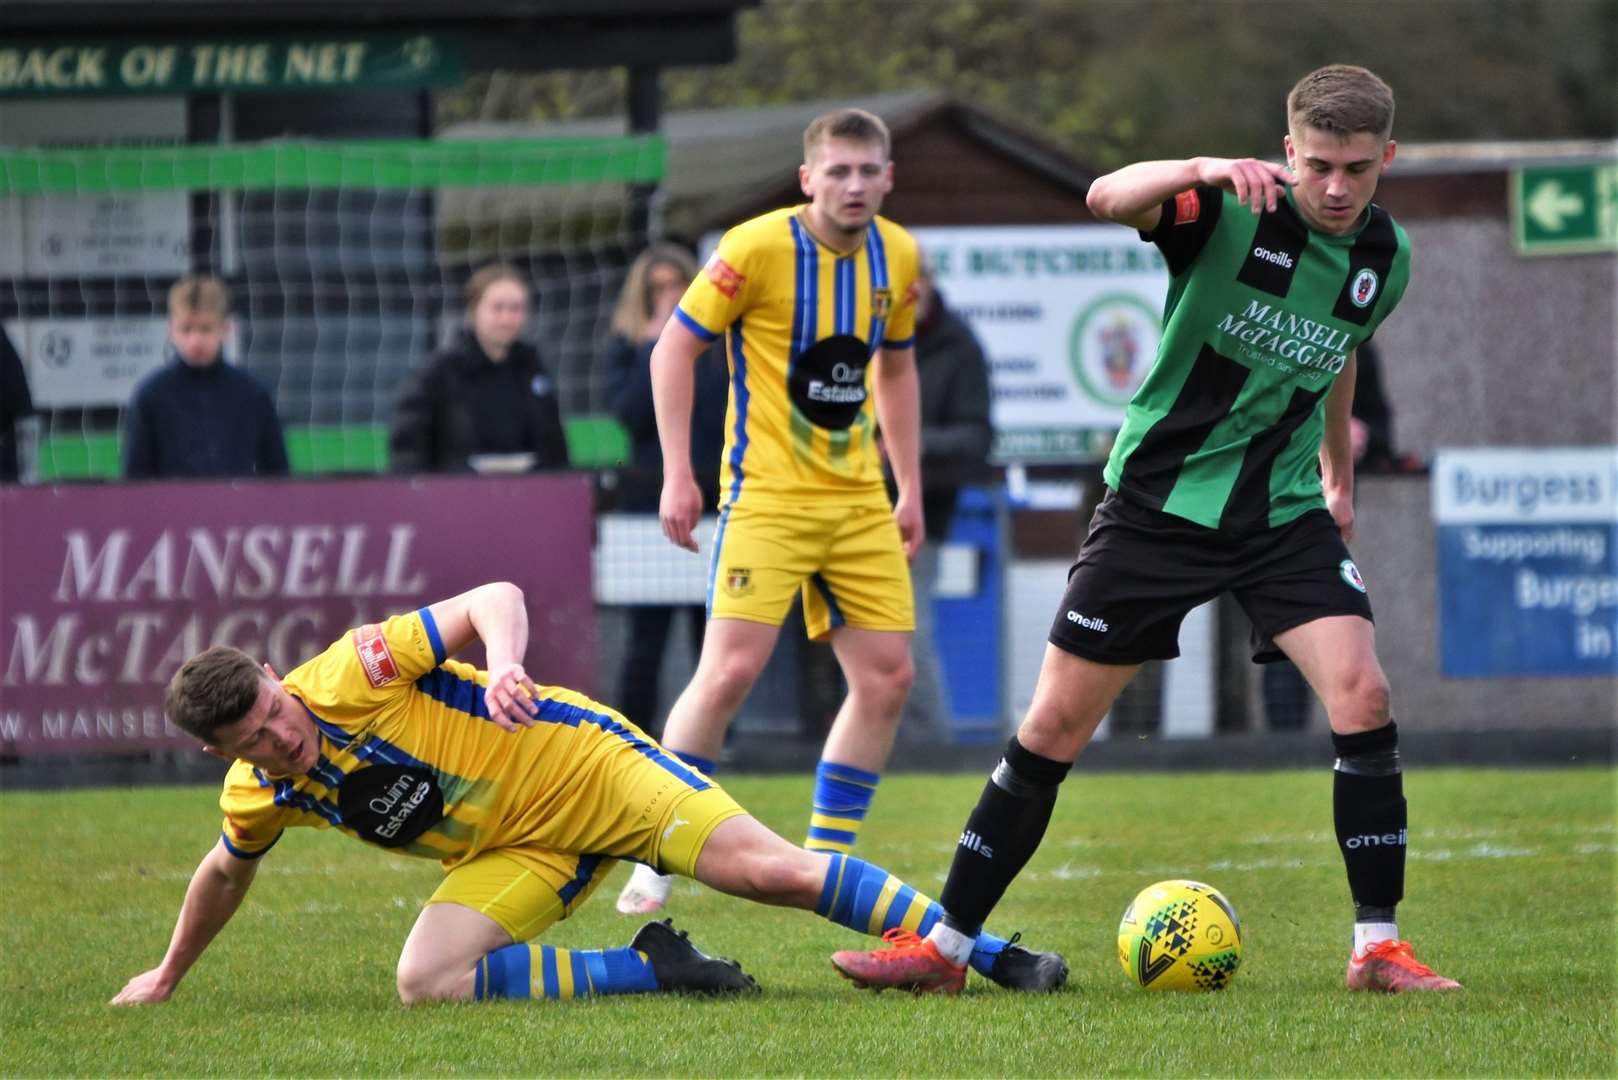 Sittingbourne ran out of steam in their defeat at Burgess Hill Picture: Ken Medwyn